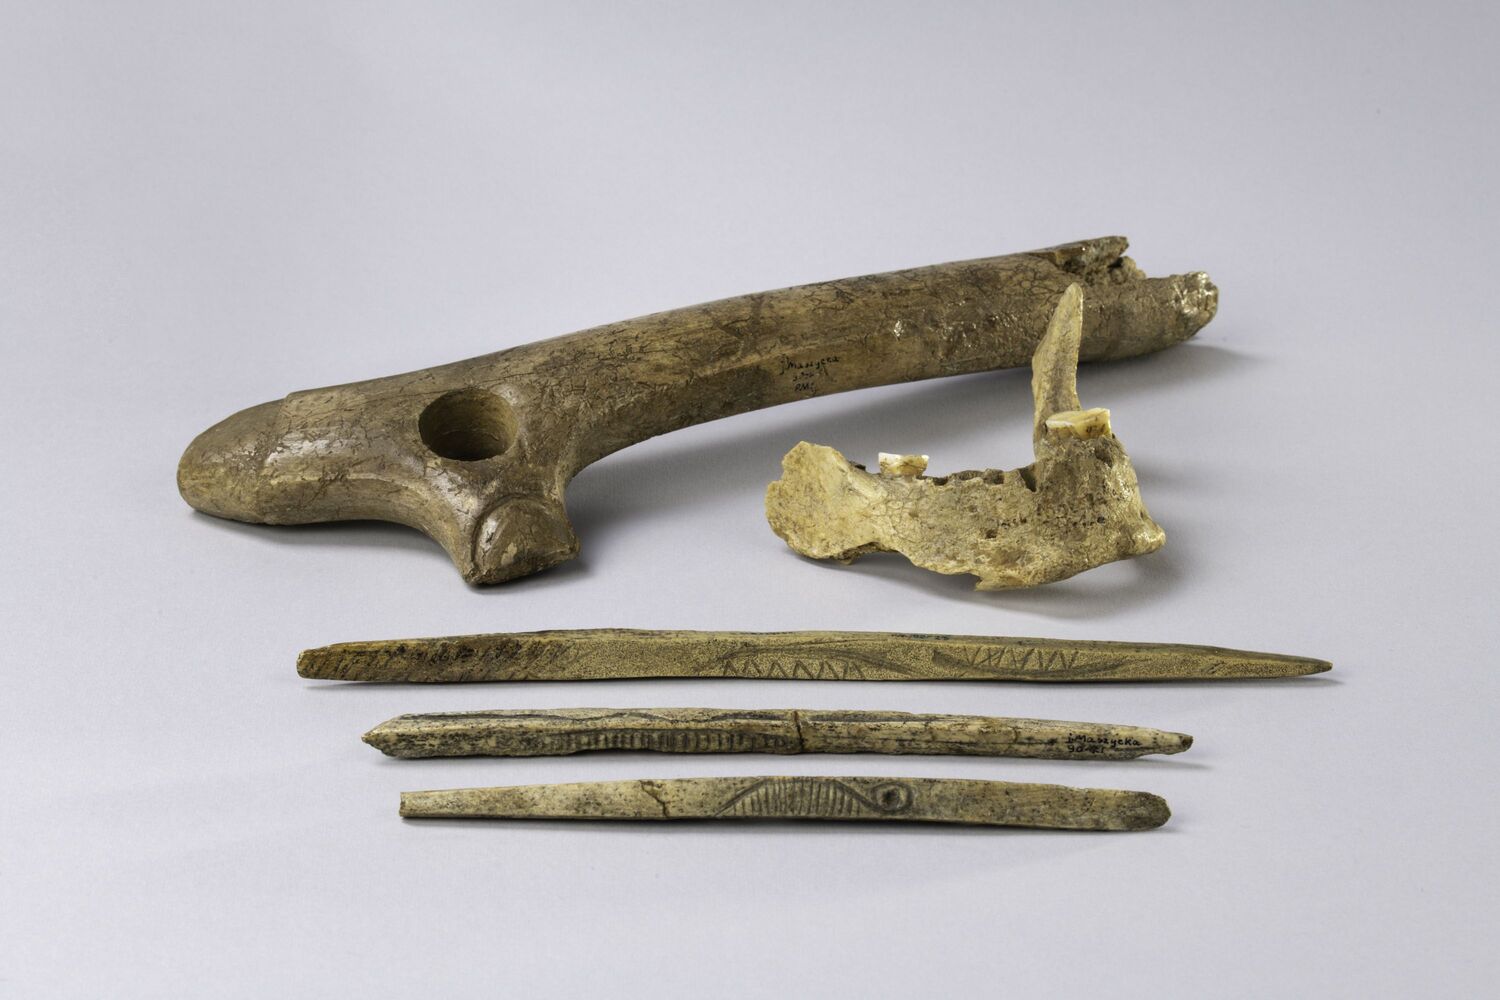 From the Maszycka Cave in southern Poland: piece of a human jaw and bone and antler artefacts from the Magdalenian culture, which was widespread in large parts of Europe between 19,000 and 14,000 years ago.